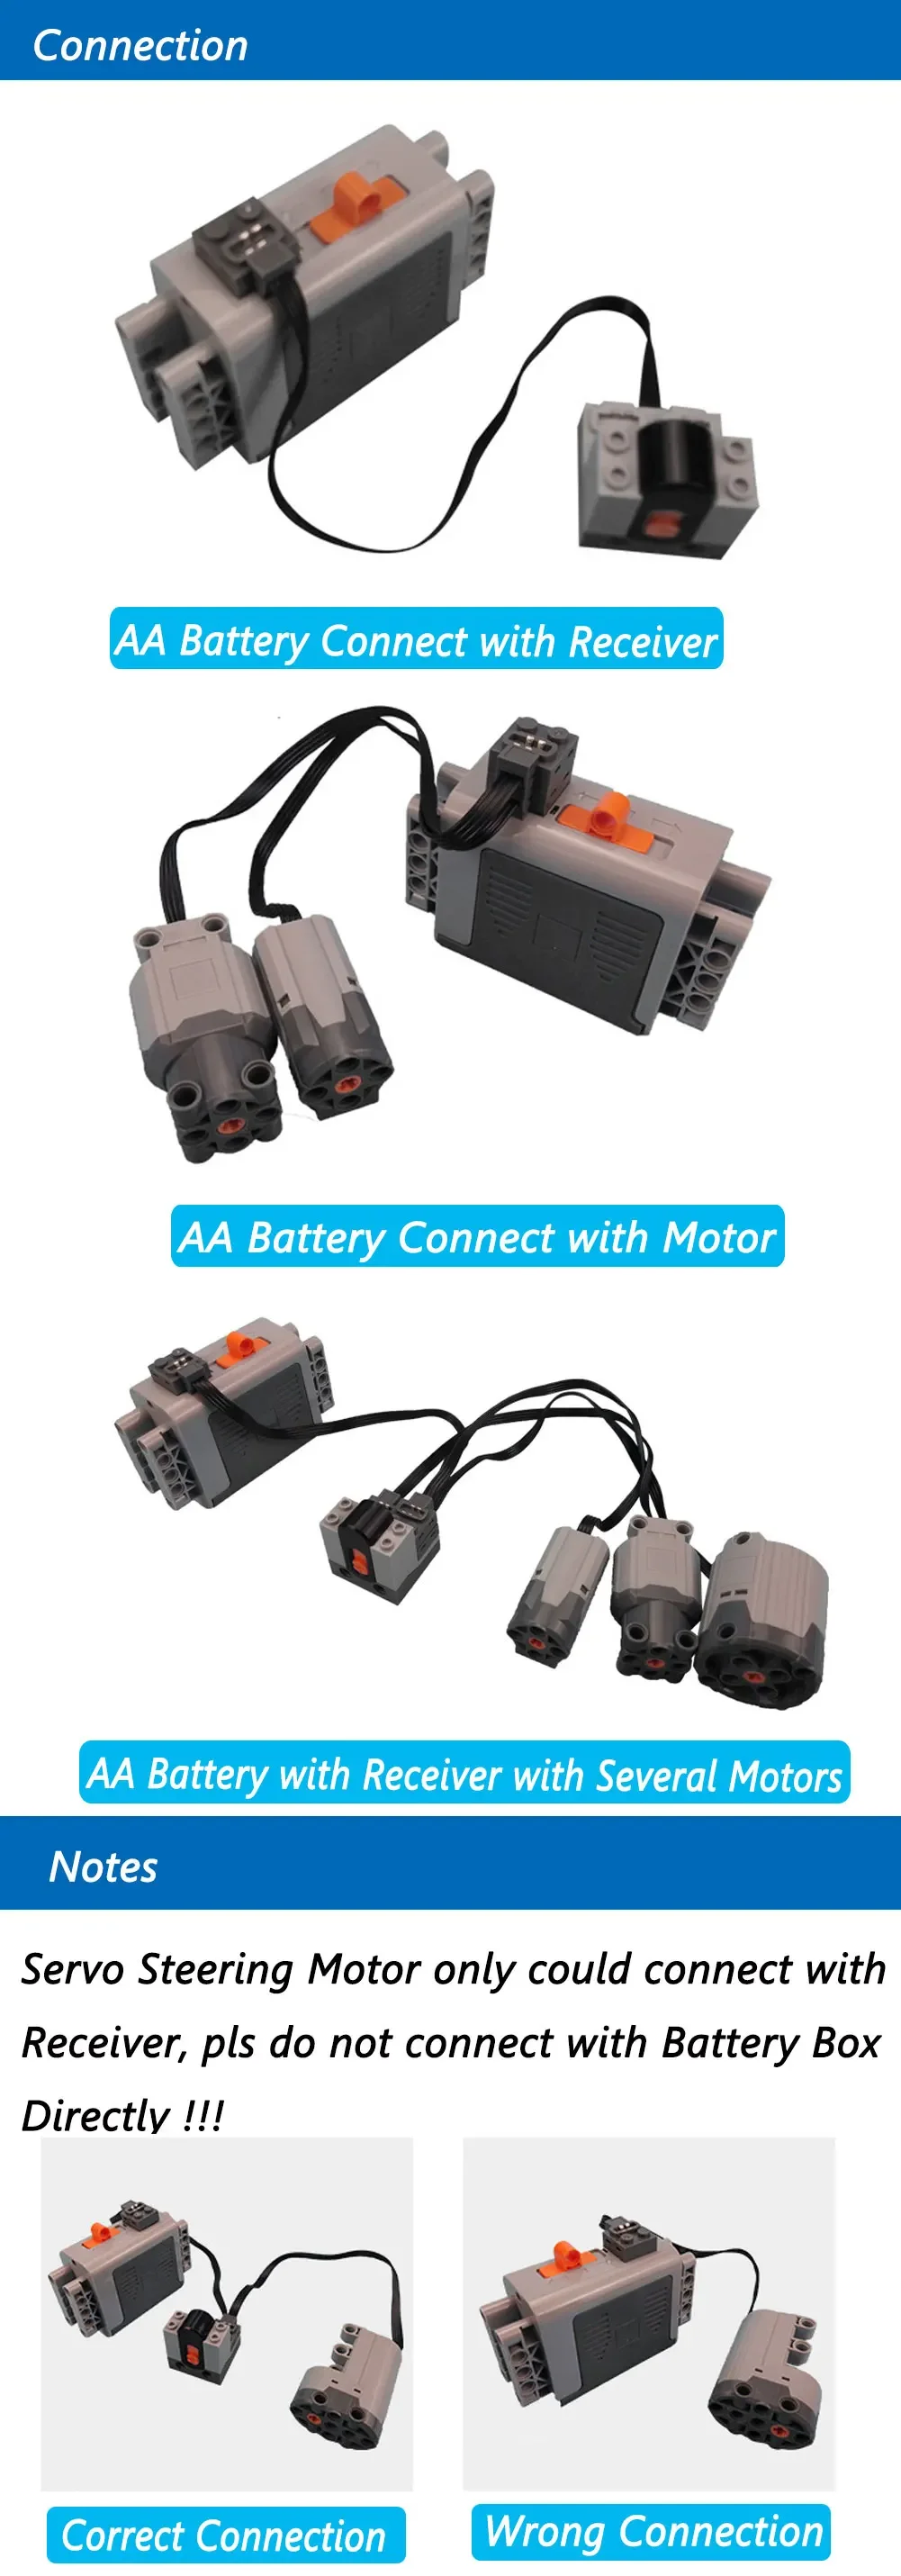 Technical MOC Power Functions Parts M L XL Servo Motor Train Buggy Motor IR Remote Extension Wire 8881 8883 88003 5292 8886